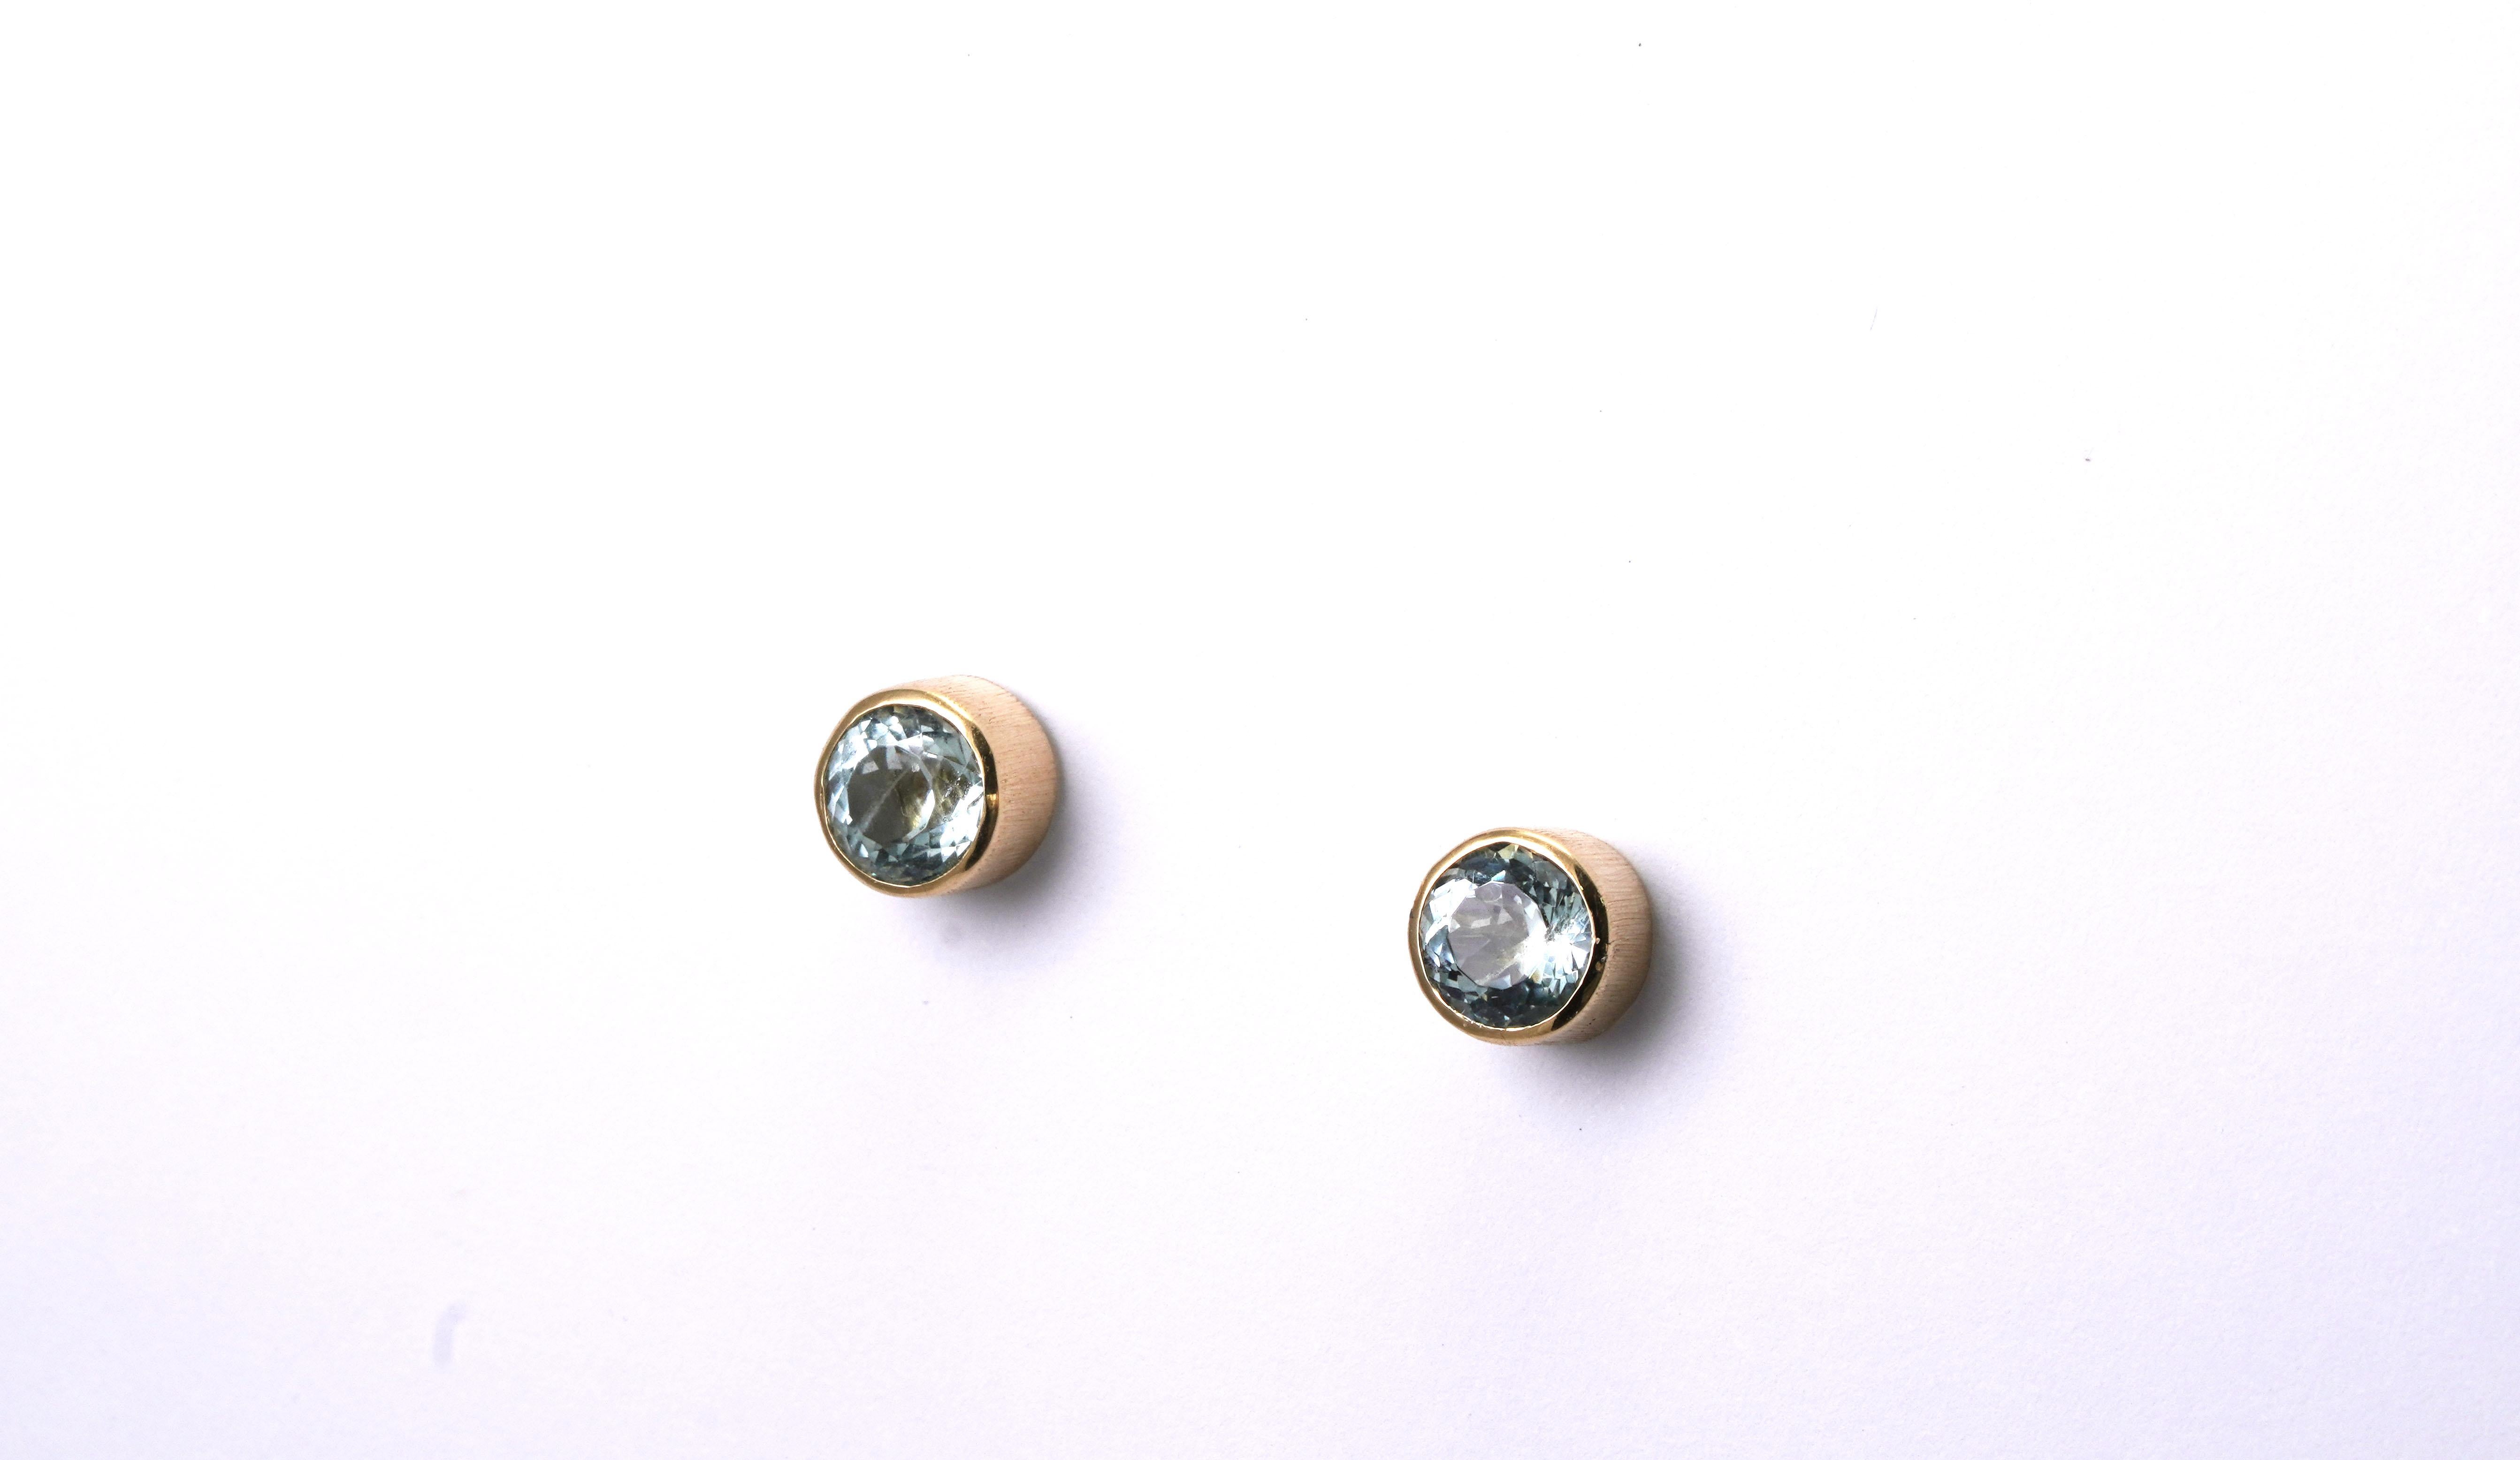 14 kt gold pair of earrings with Aquamarine
Gold Color: Yellow
Diameter: 6.5 mm
Total weight: 1.87 grams

Set with:
- Aquamarine
Cut: Round 
Color / Clarity: Blue / Transparent